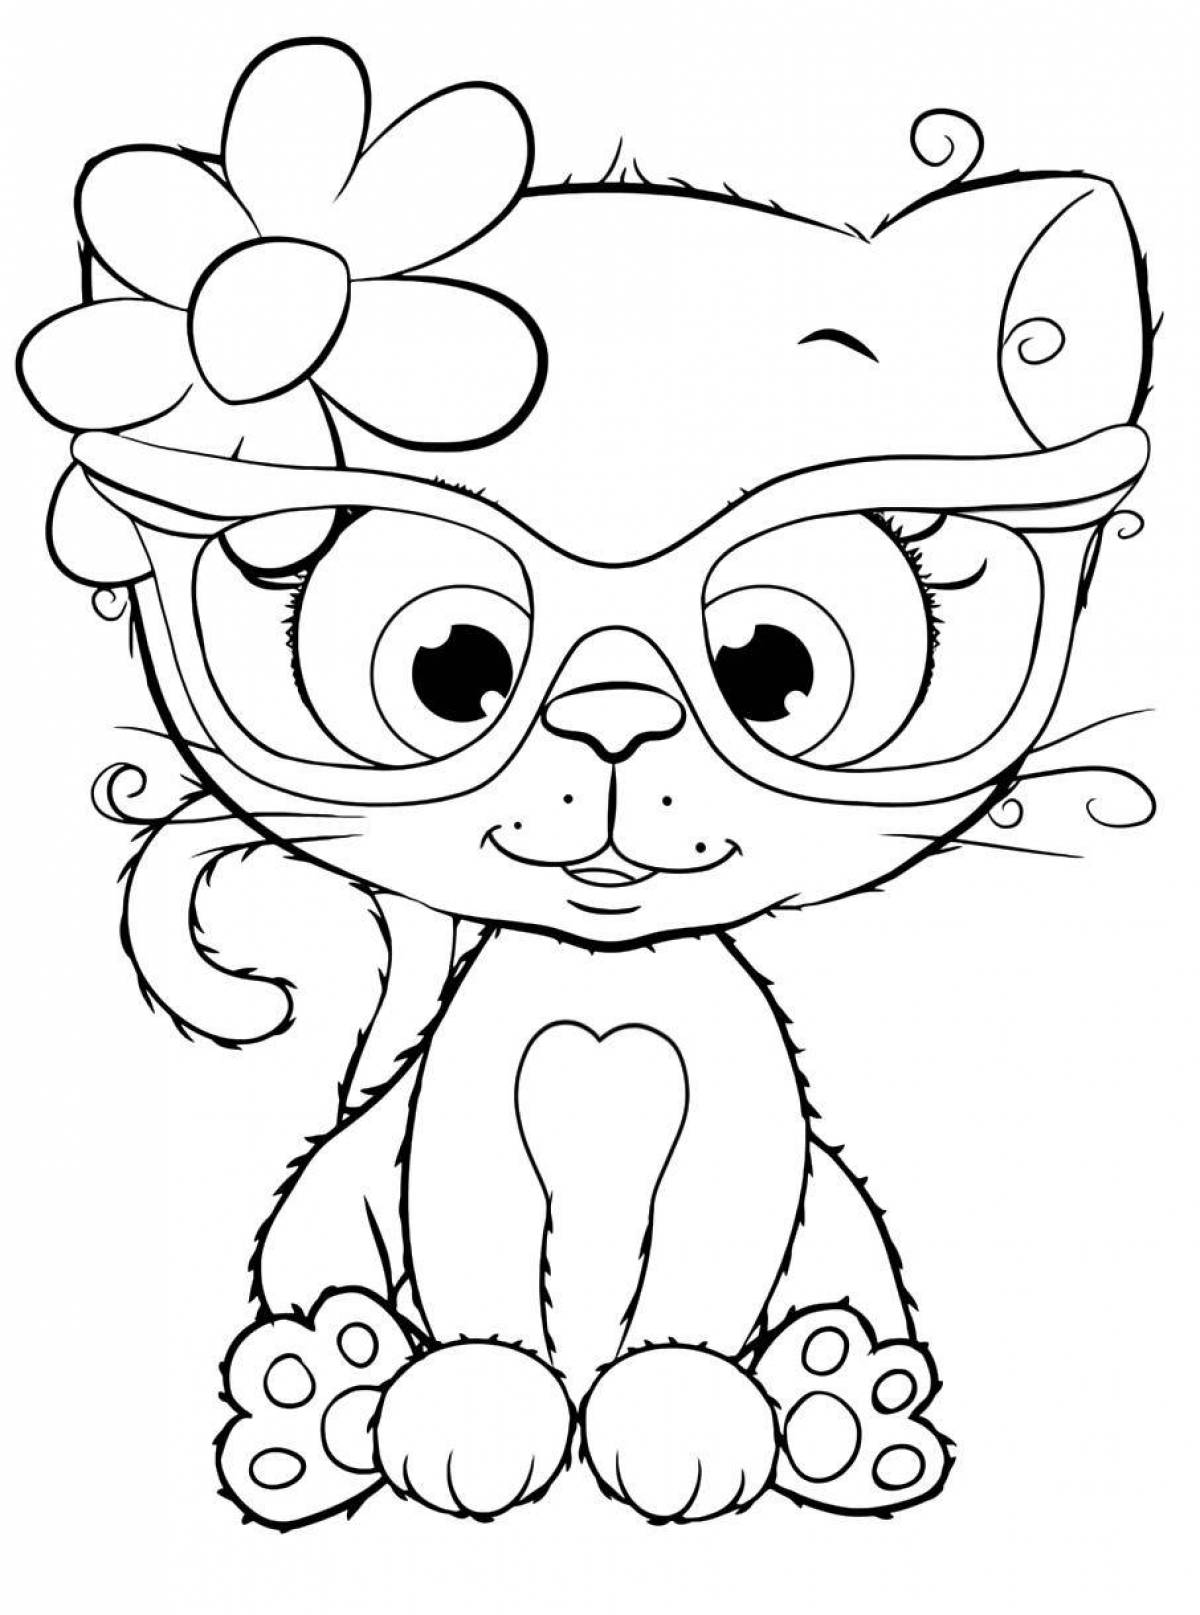 Coloring page graceful kitten